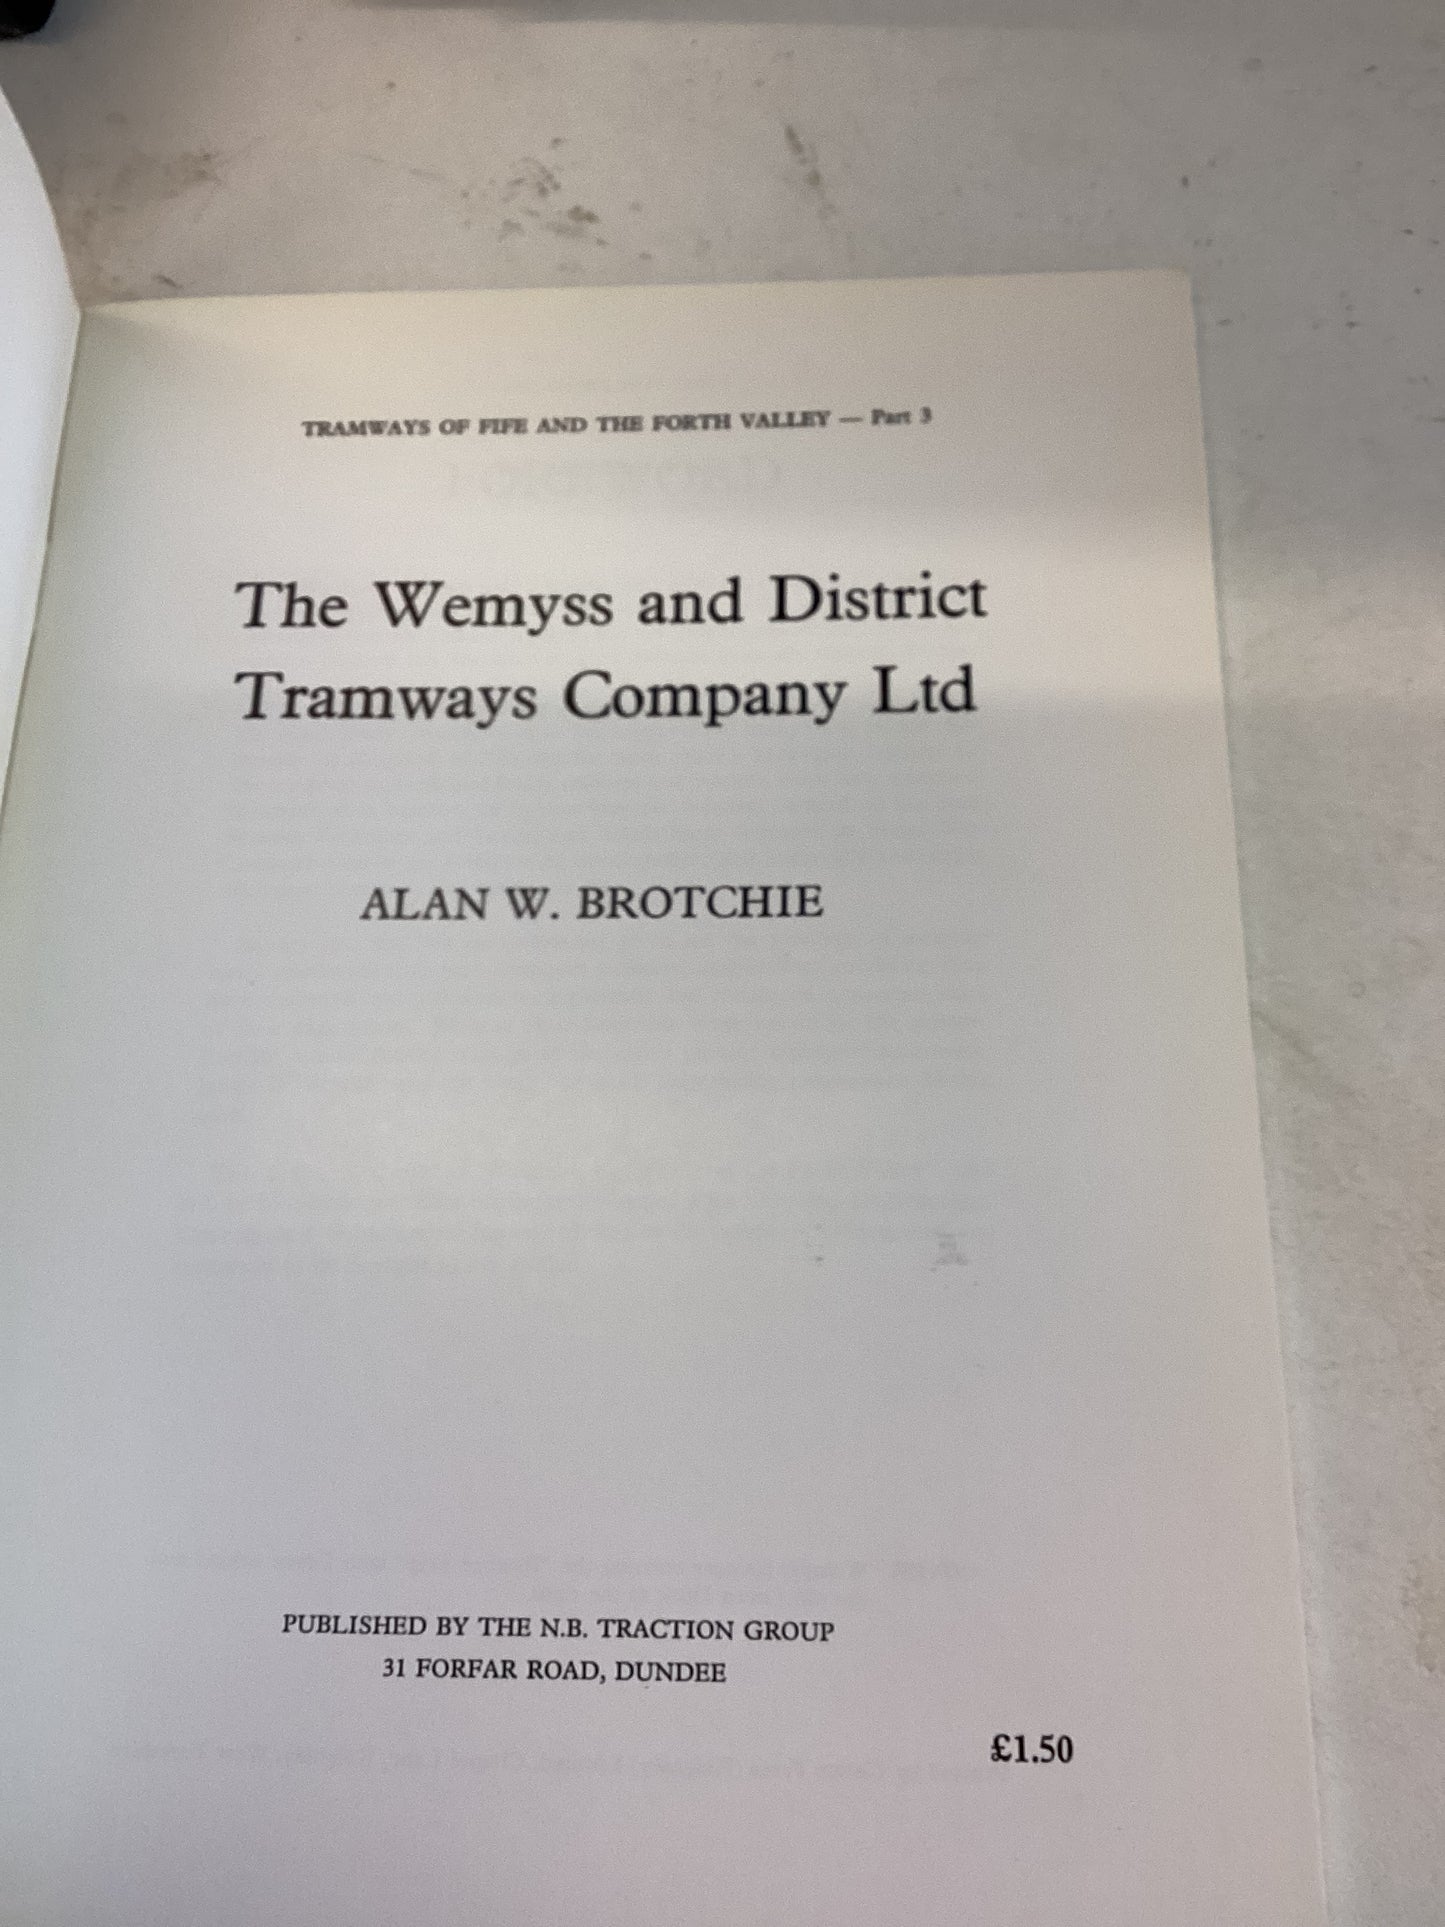 The Wemyss and District Tramways Co Ltd Tramways of Fife and The Forth Valley Part 3 Alan W Brotchie